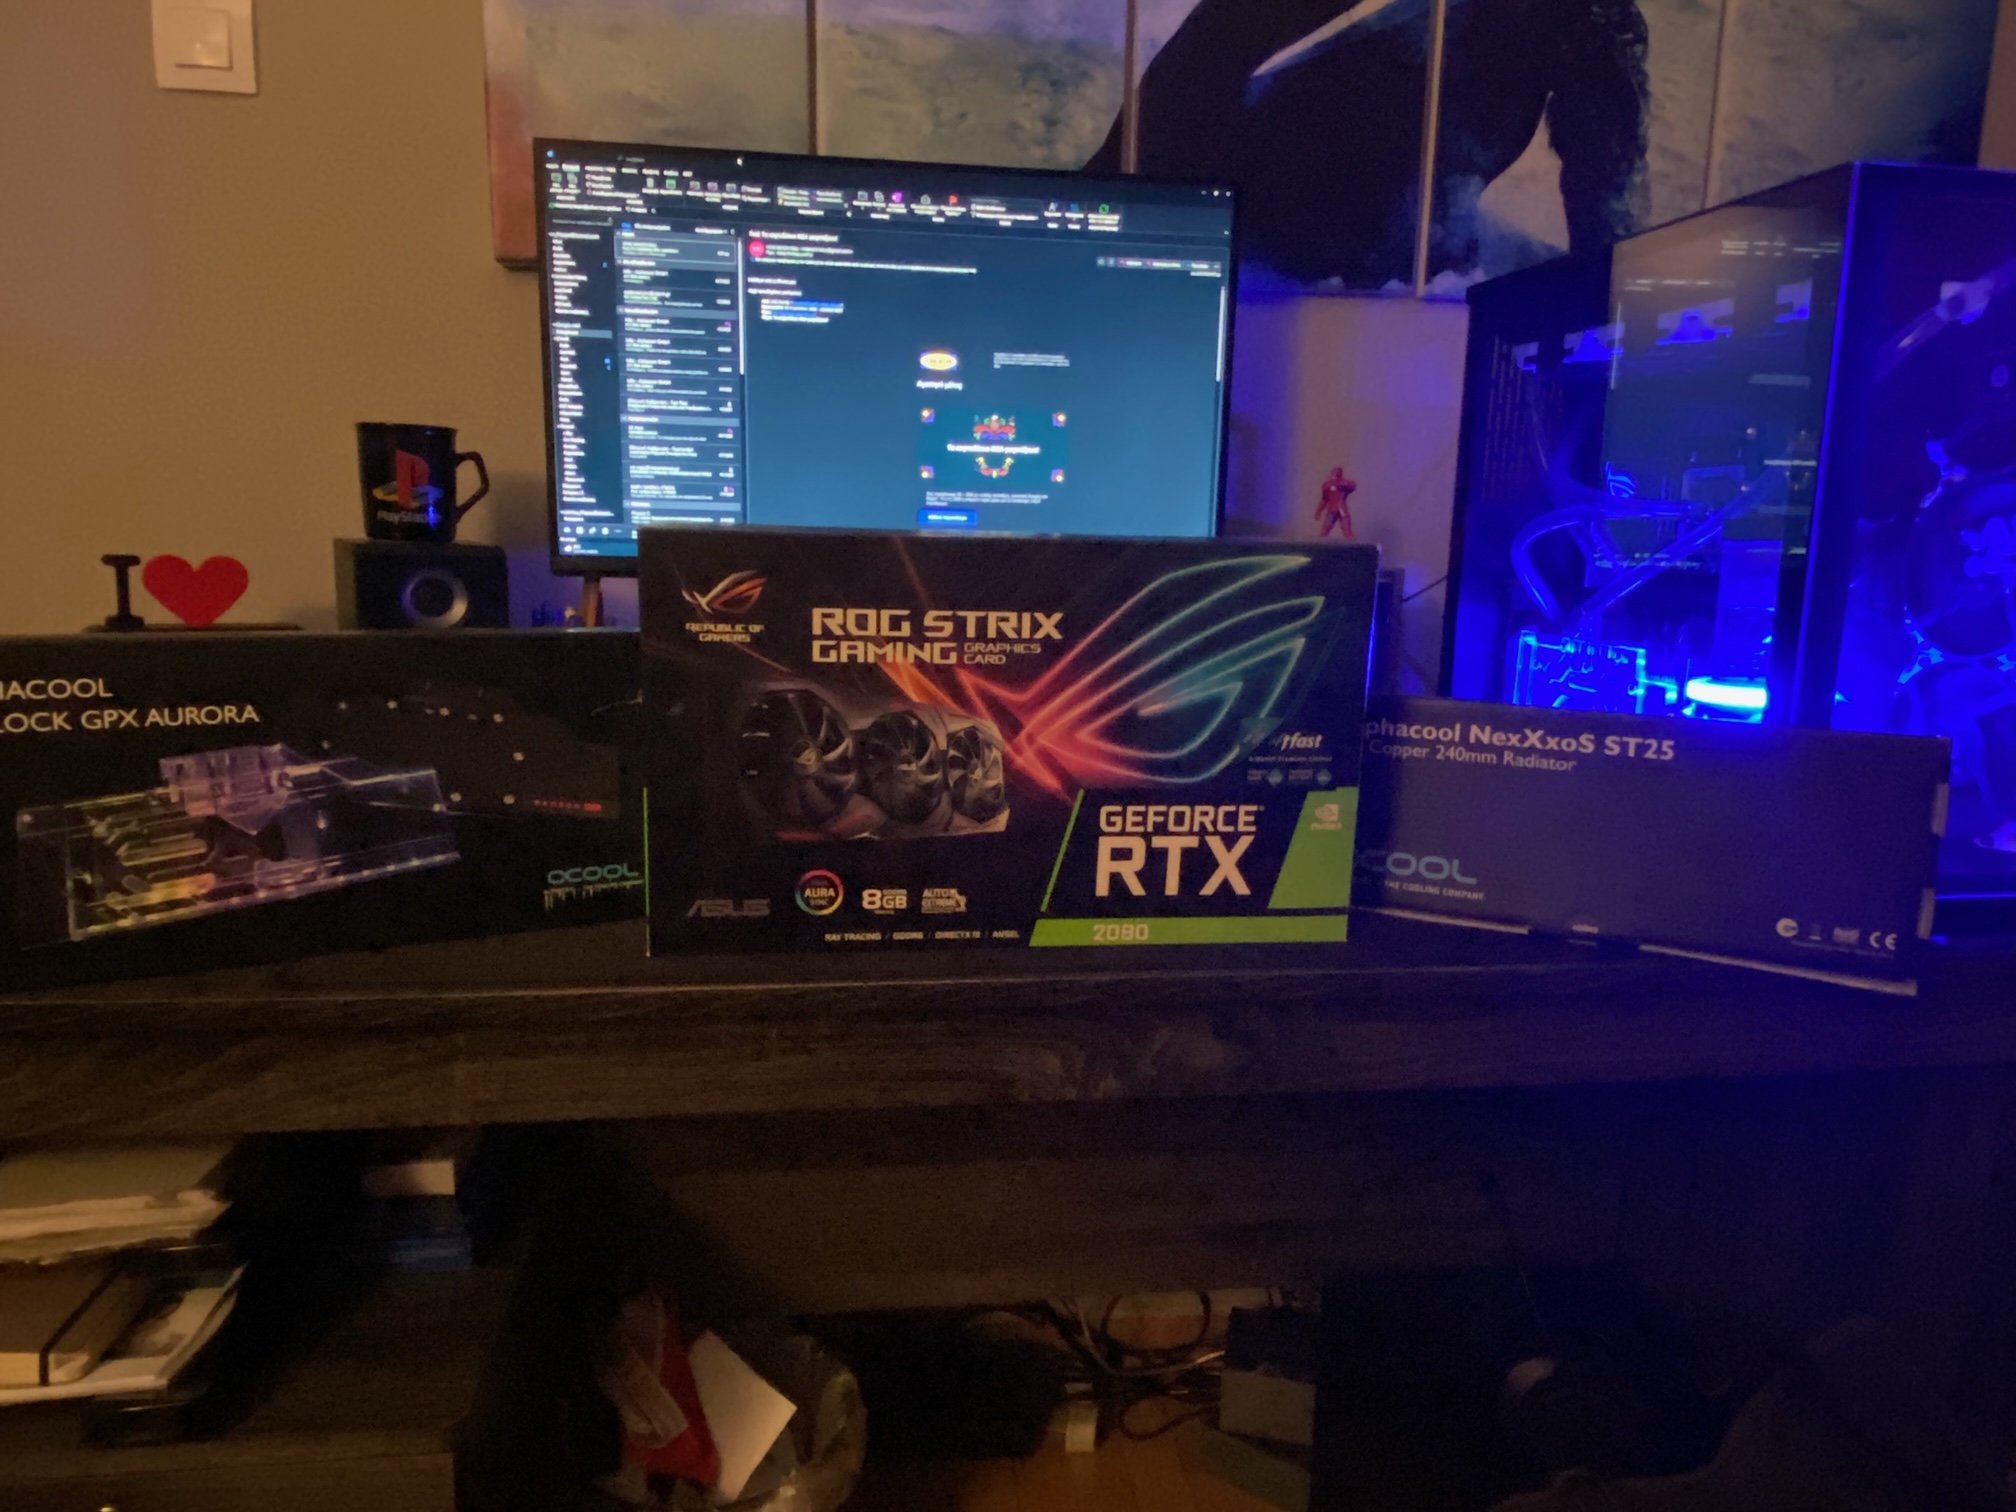 More information about "Asus Rog Strix RTX2080 Watercooled set"